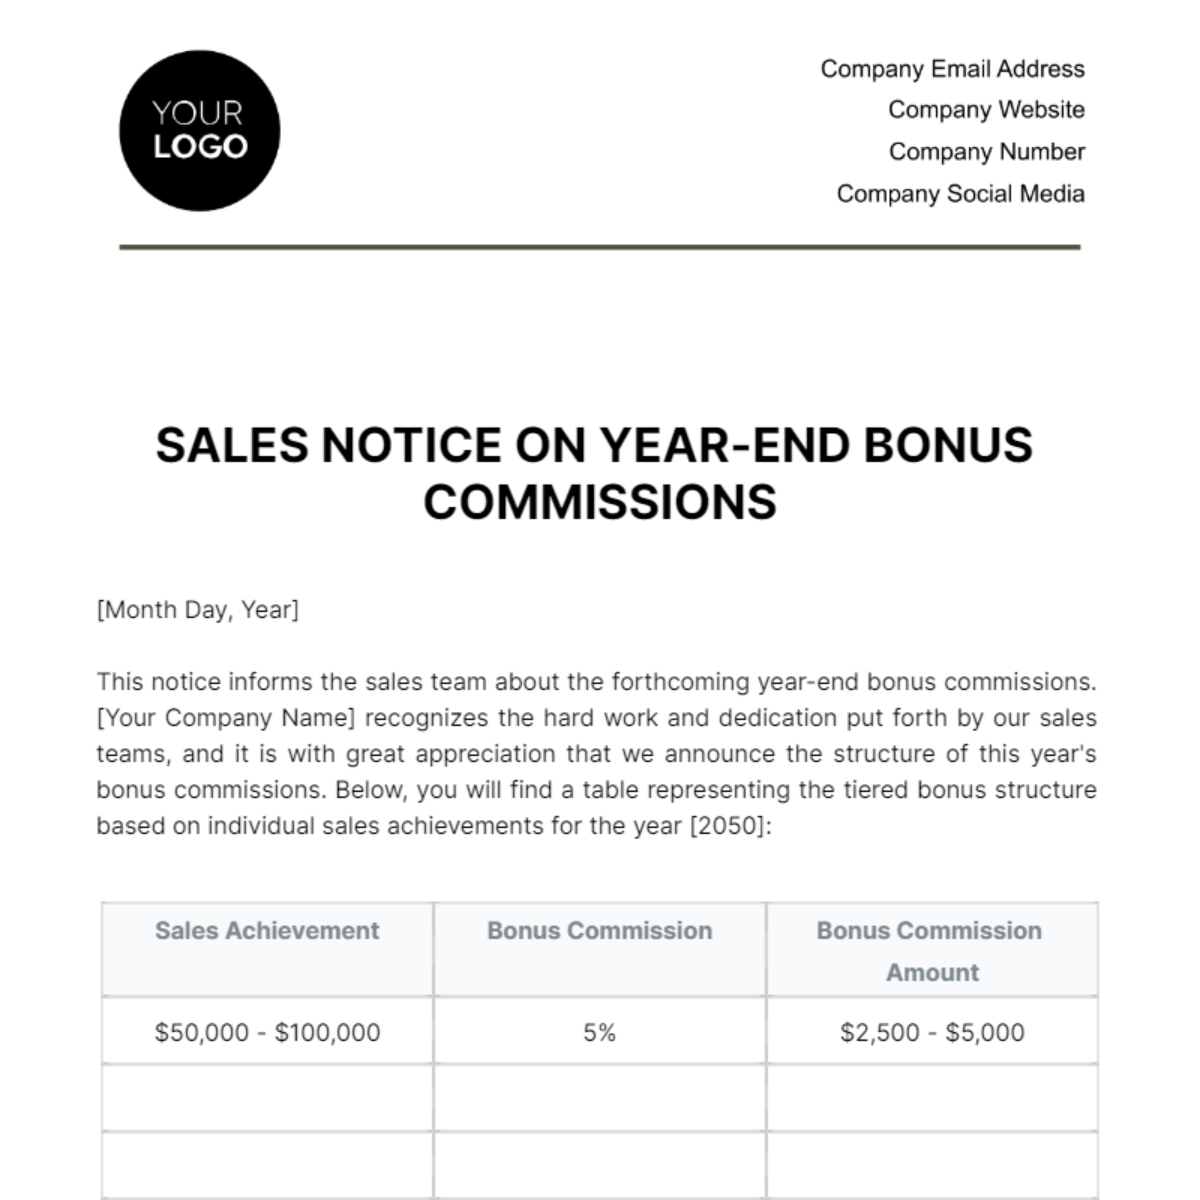 Free Sales Notice on Year-End Bonus Commissions Template